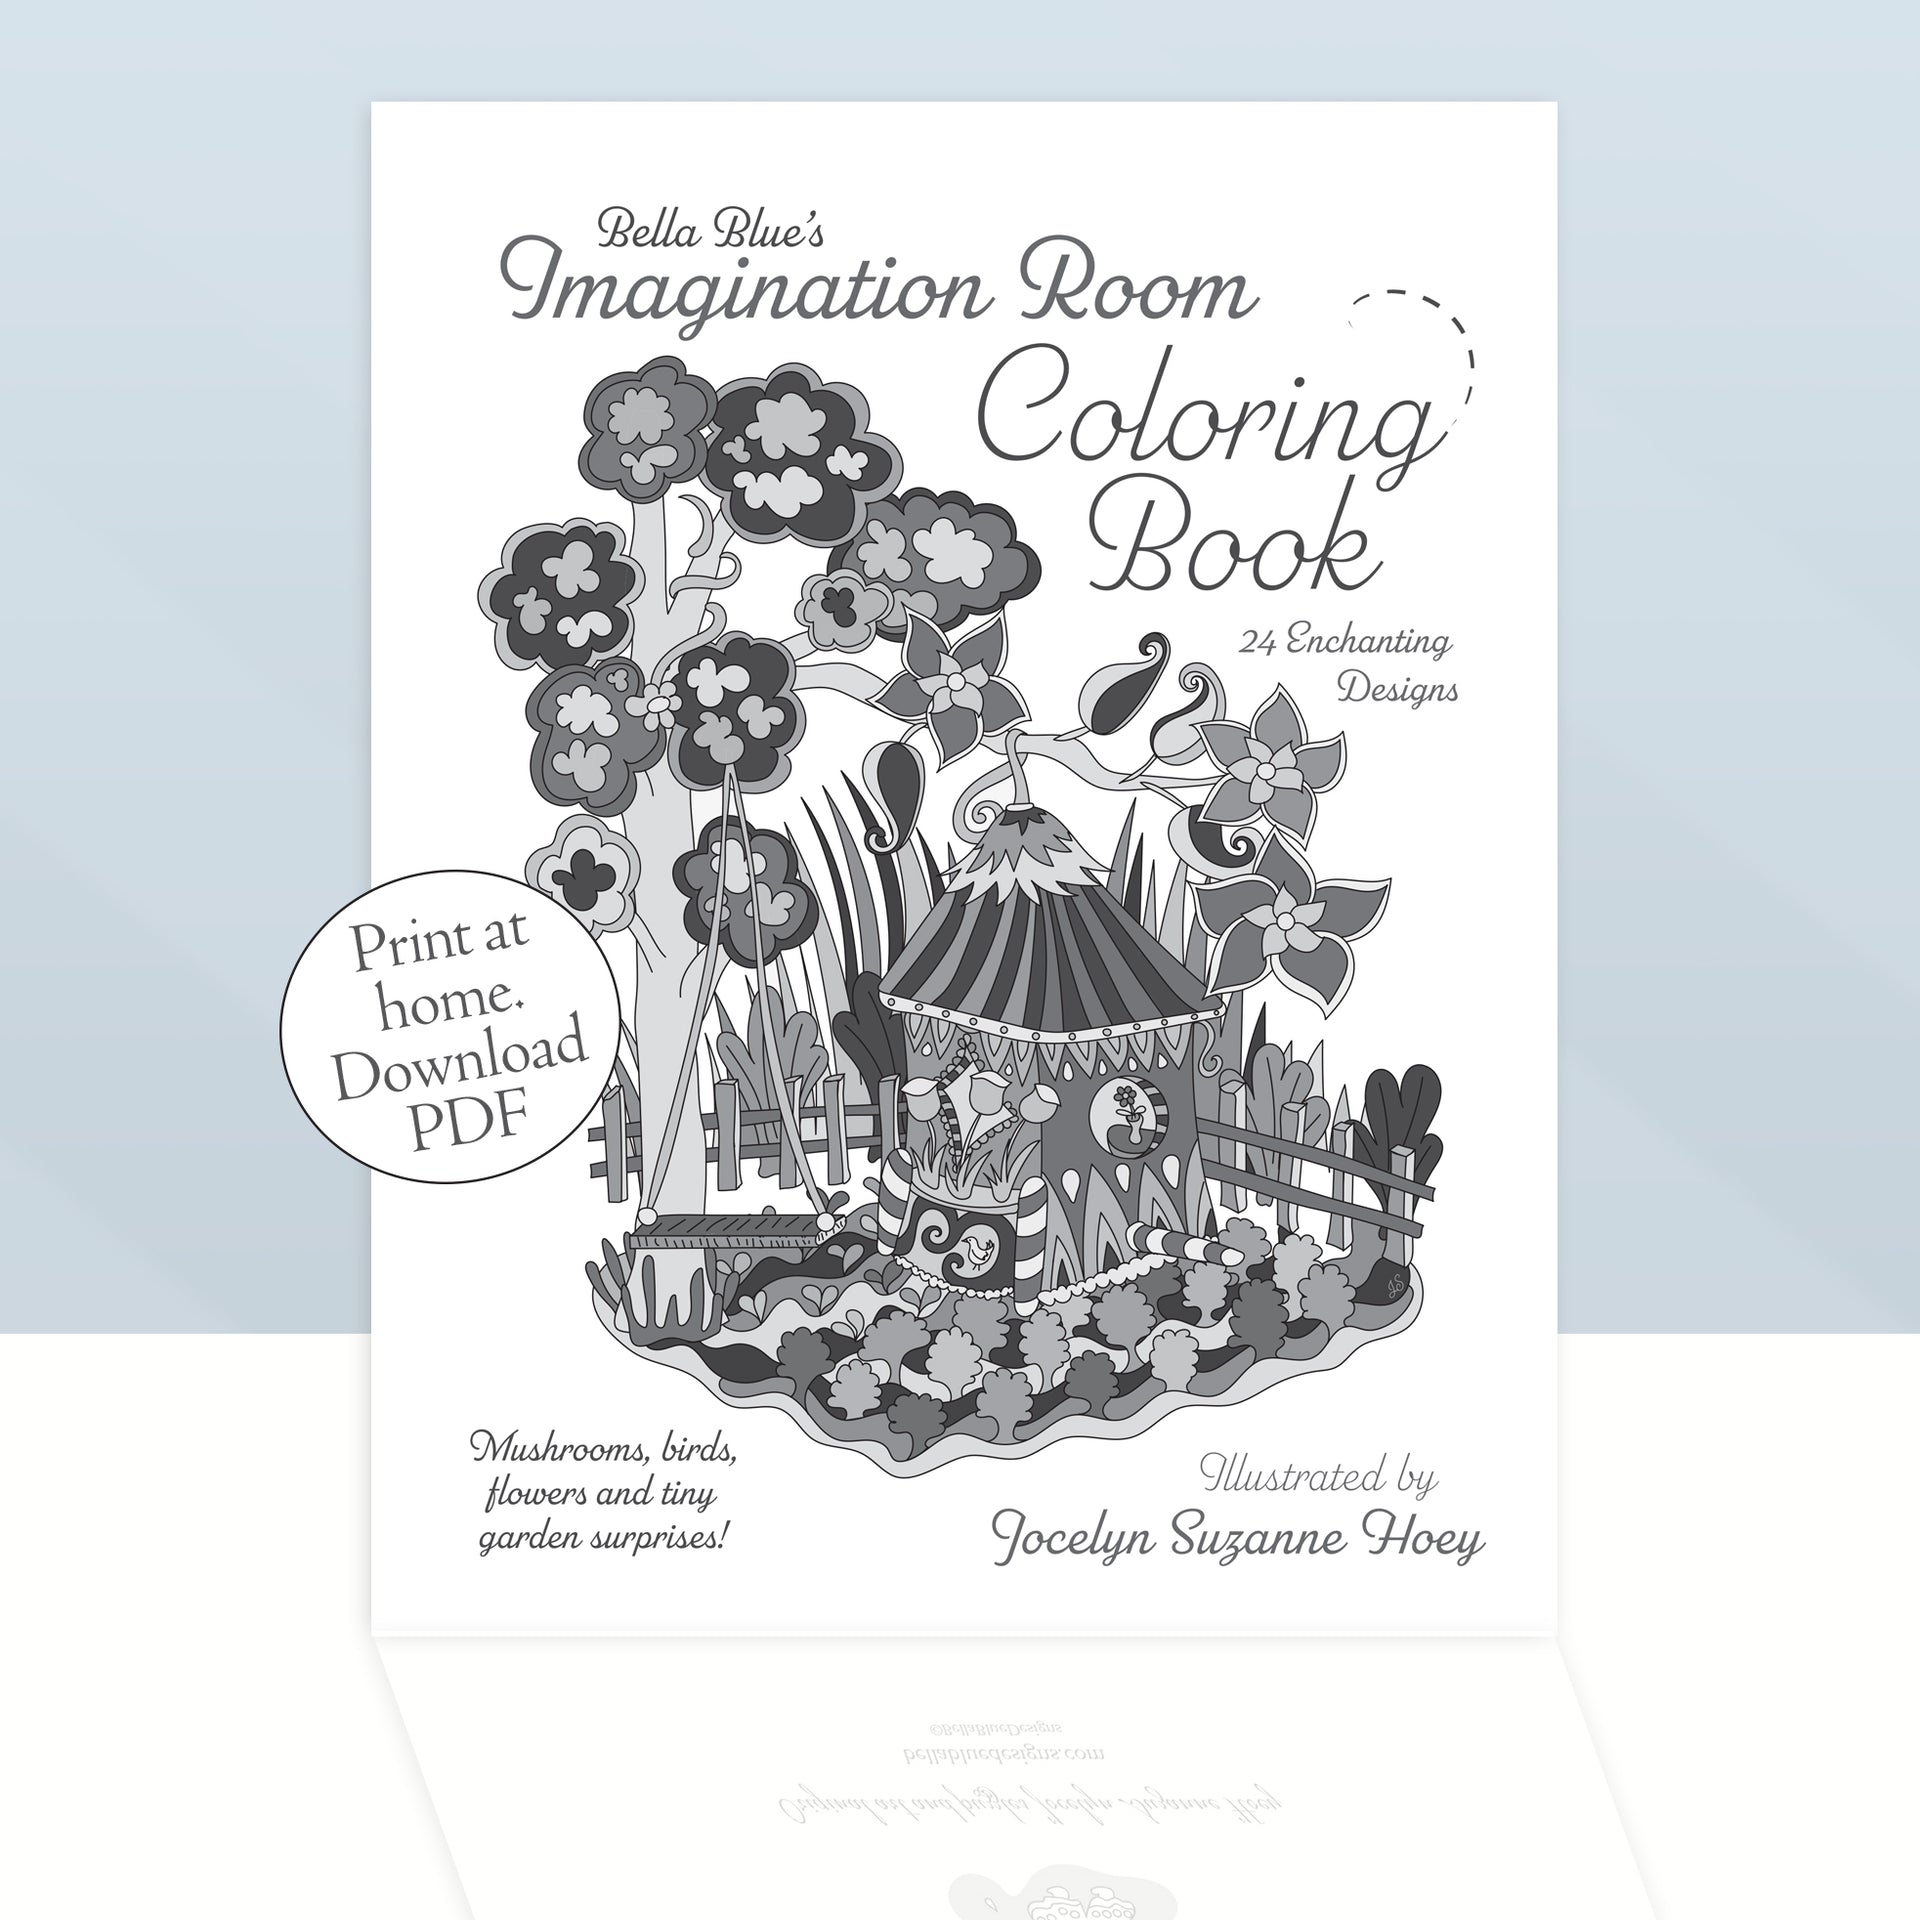 At Home Printable Coloring Book - Digital Download – goodobjects